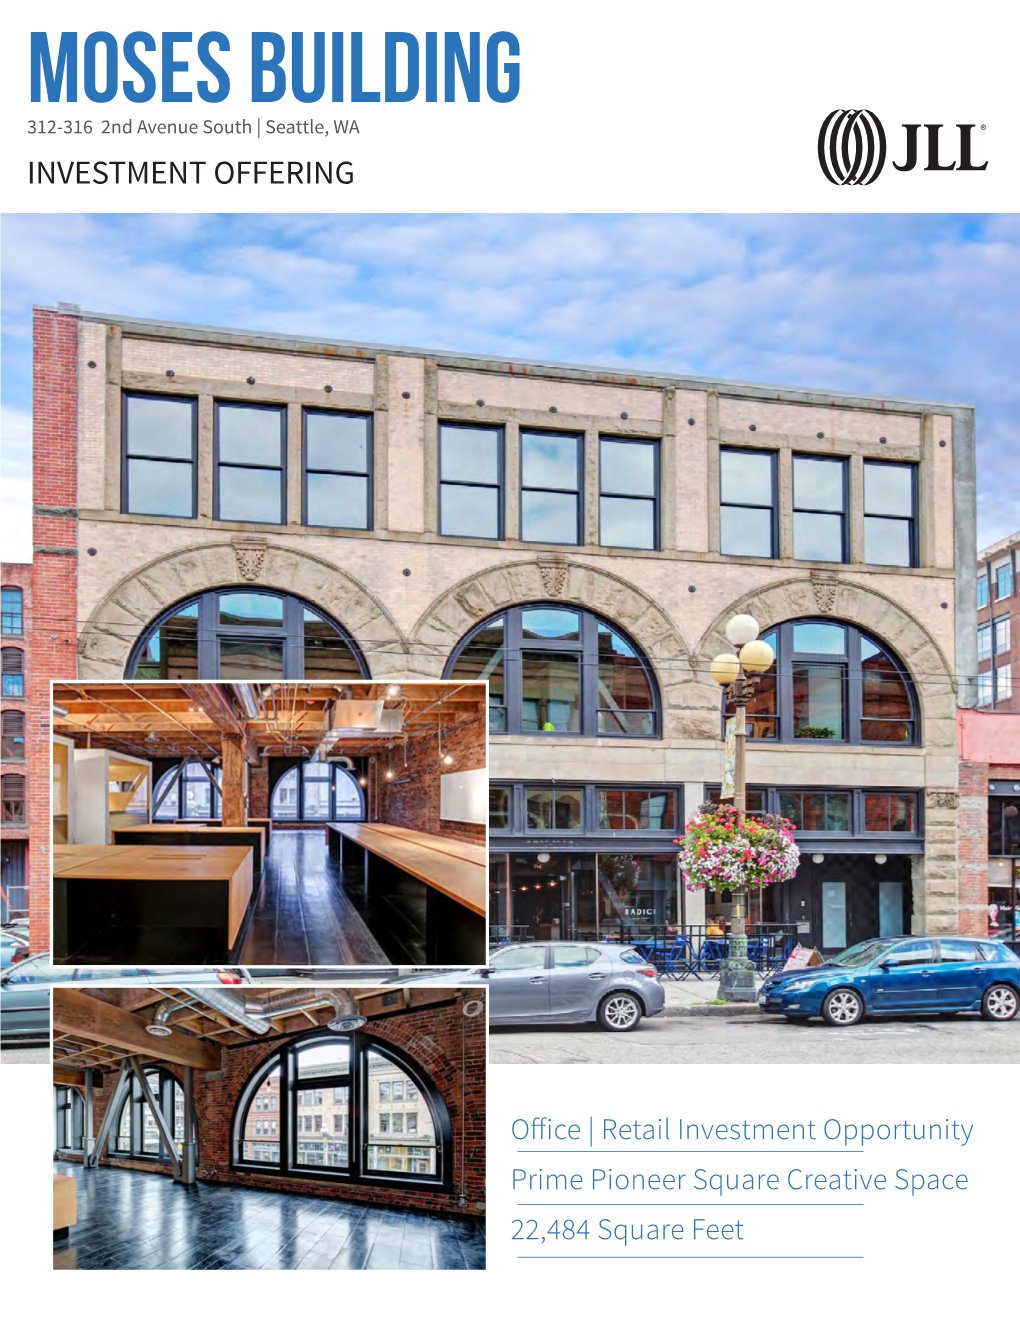 MOSES BUILDING 312-316 2Nd Avenue South | Seattle, WA INVESTMENT OFFERING